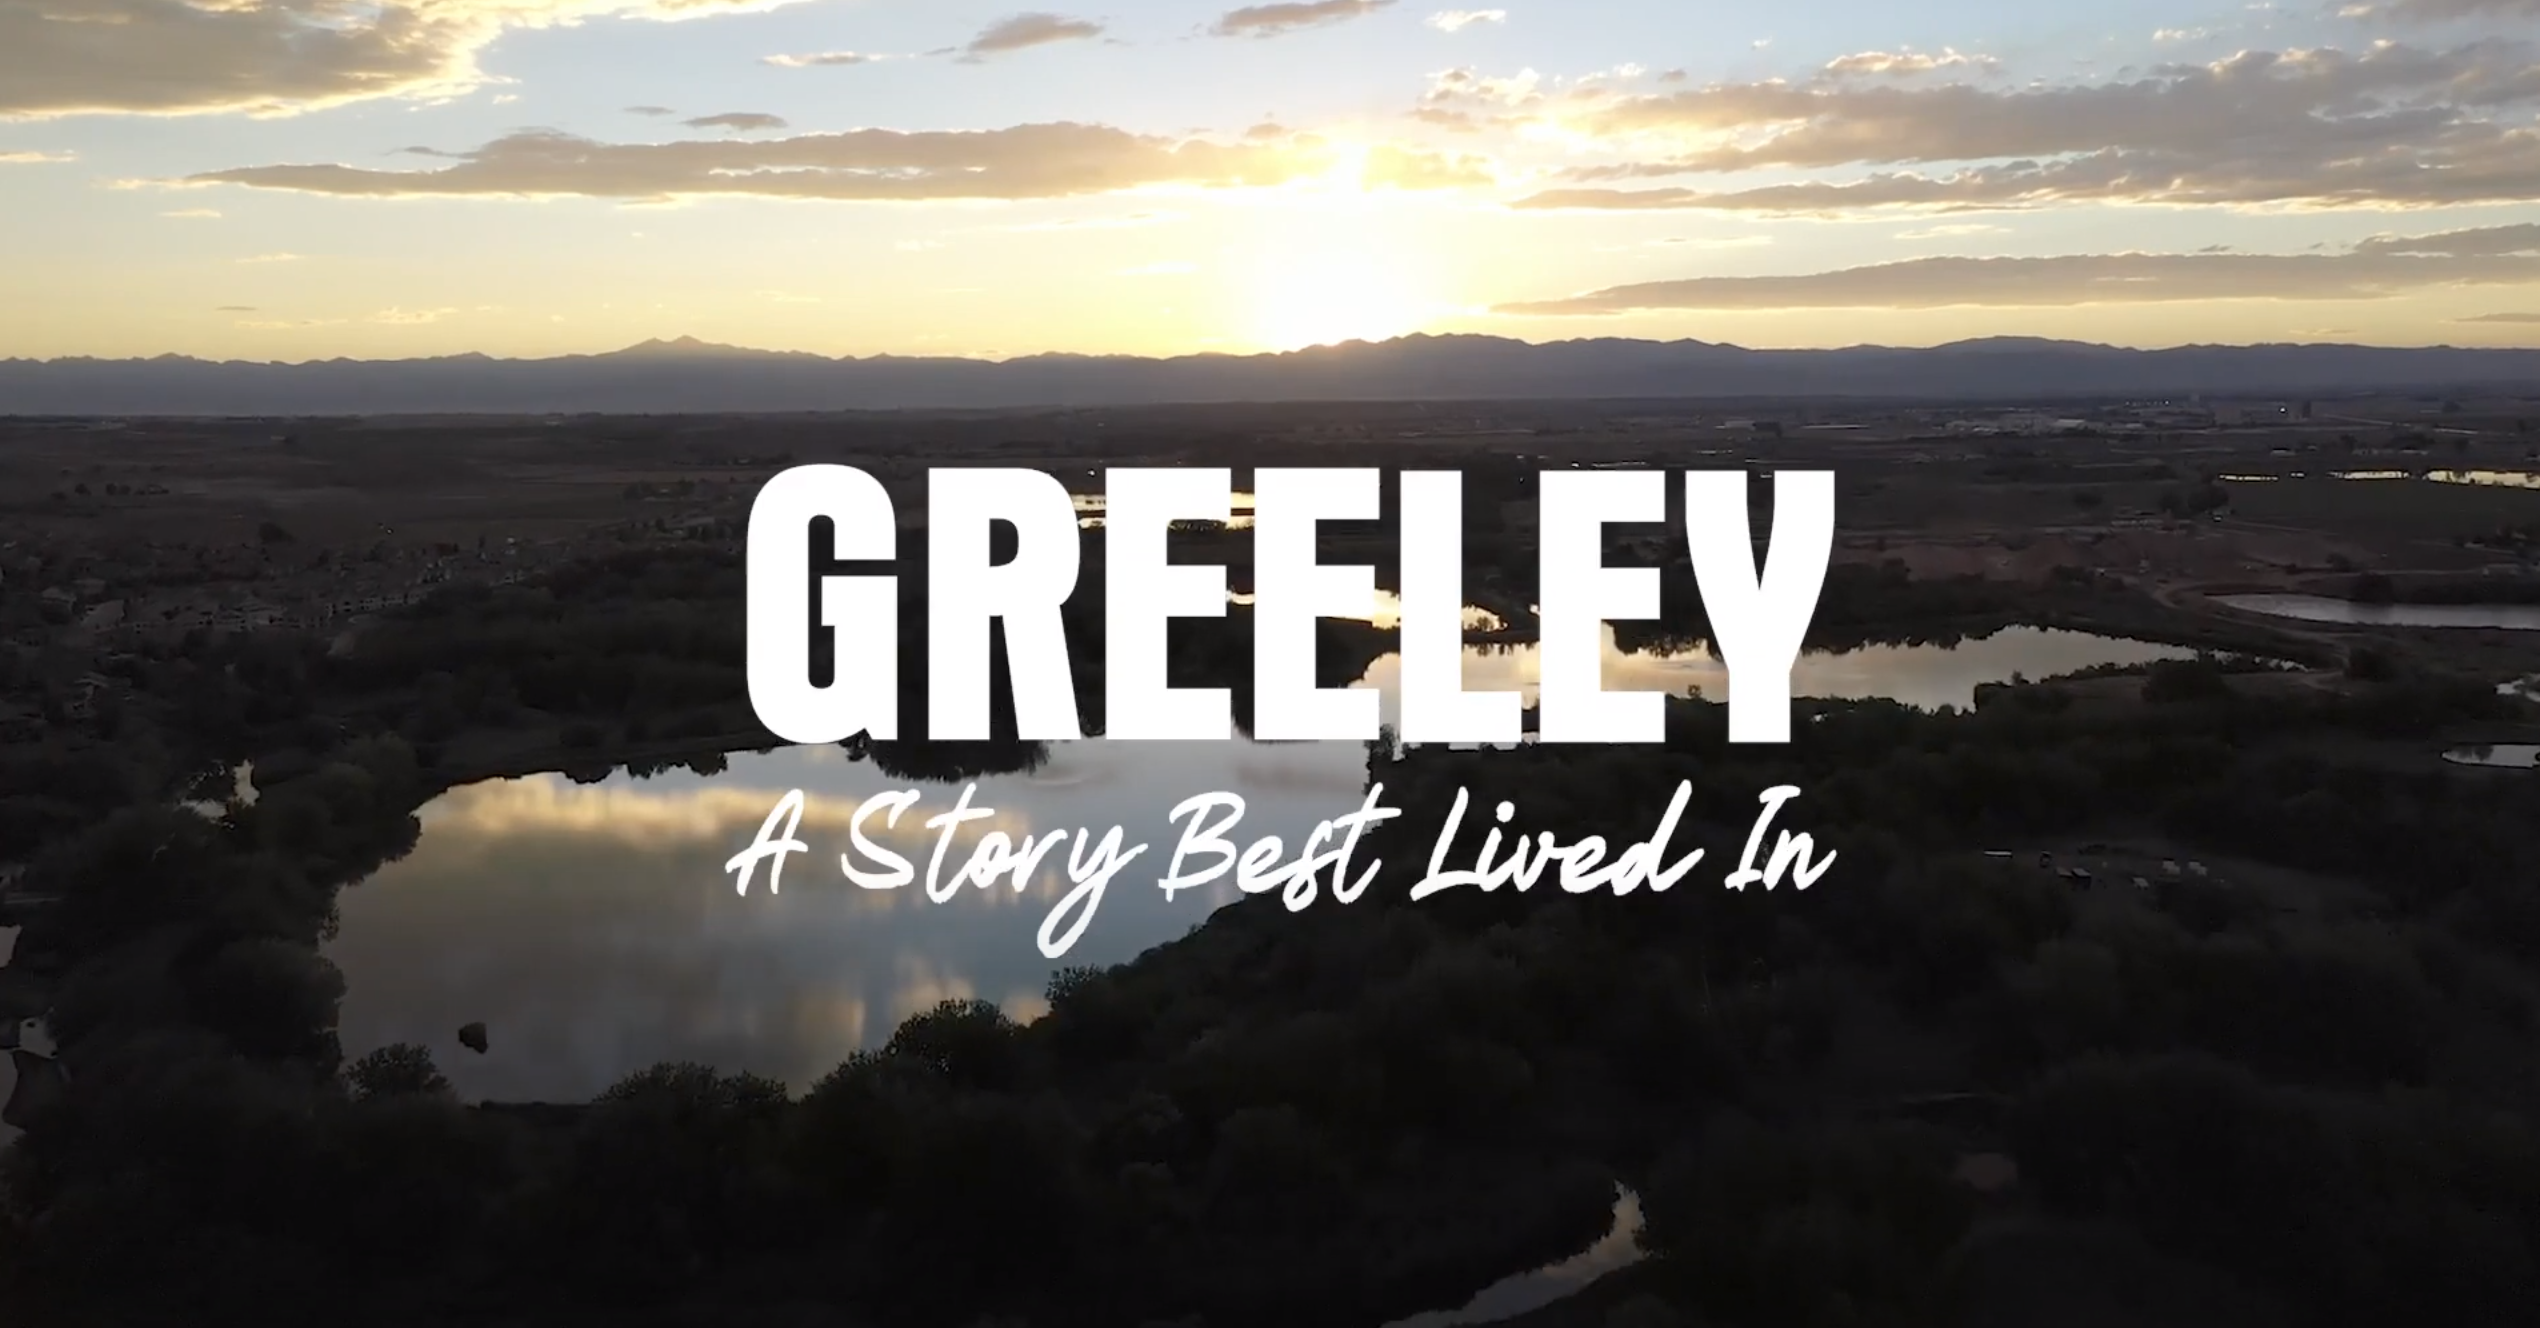 Greeley - A Story Best Lived In